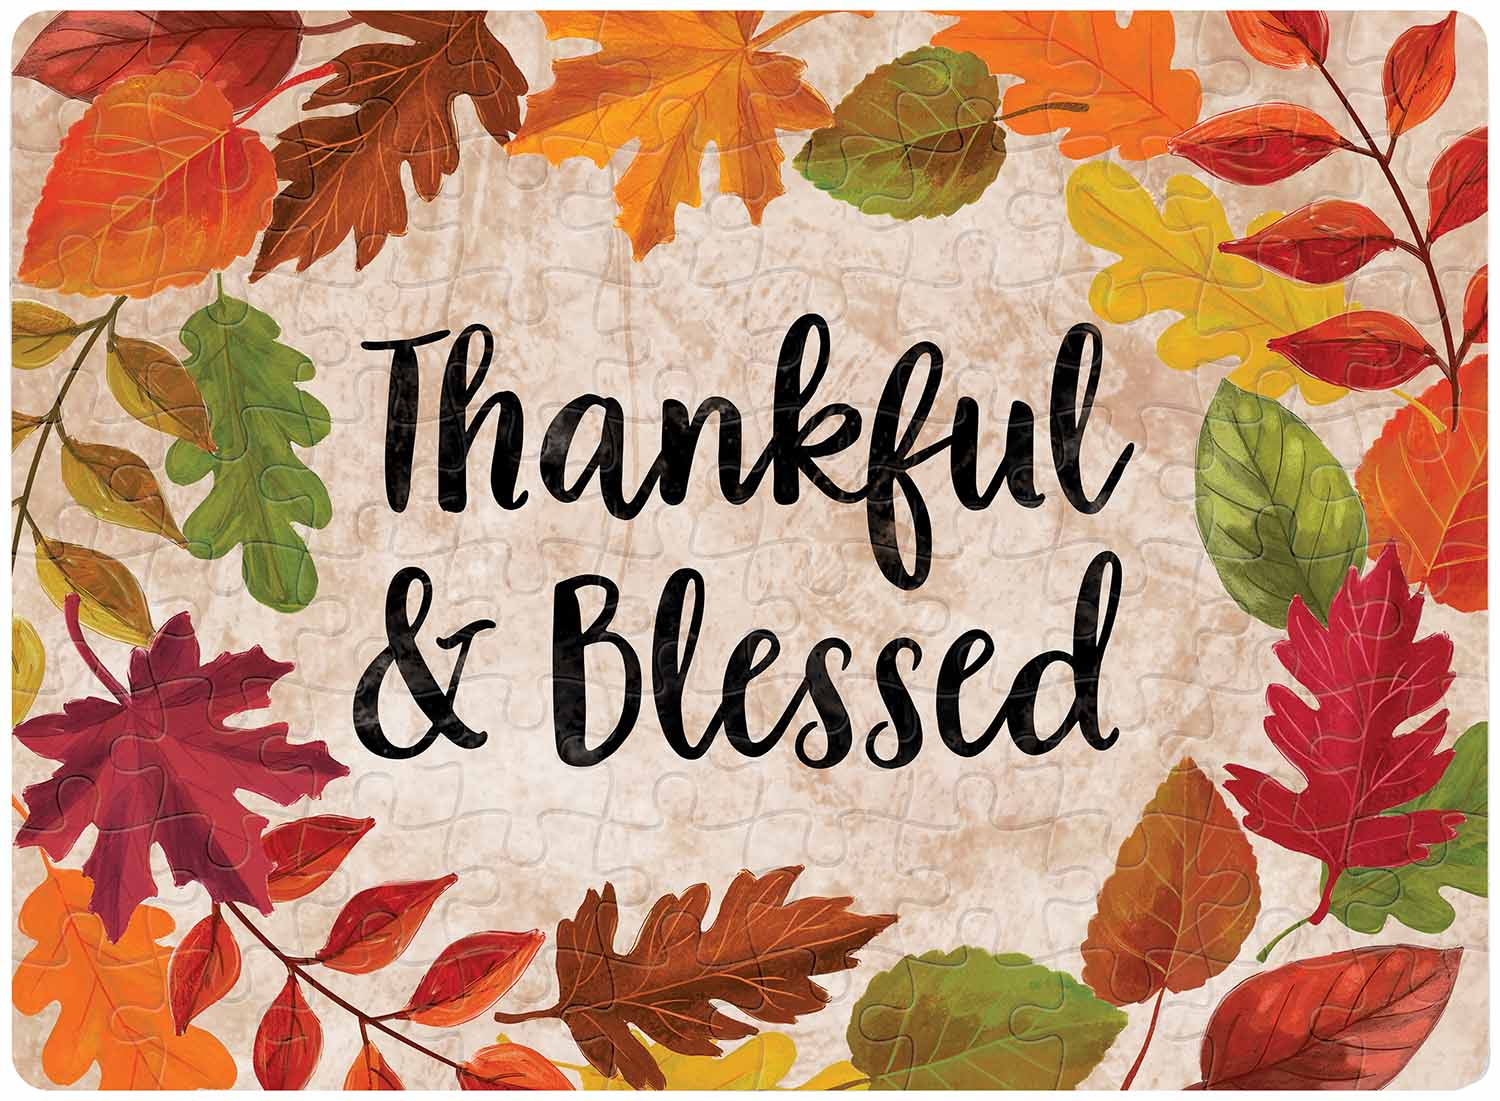 Thankful & Blessed Thanksgiving Jigsaw Puzzle